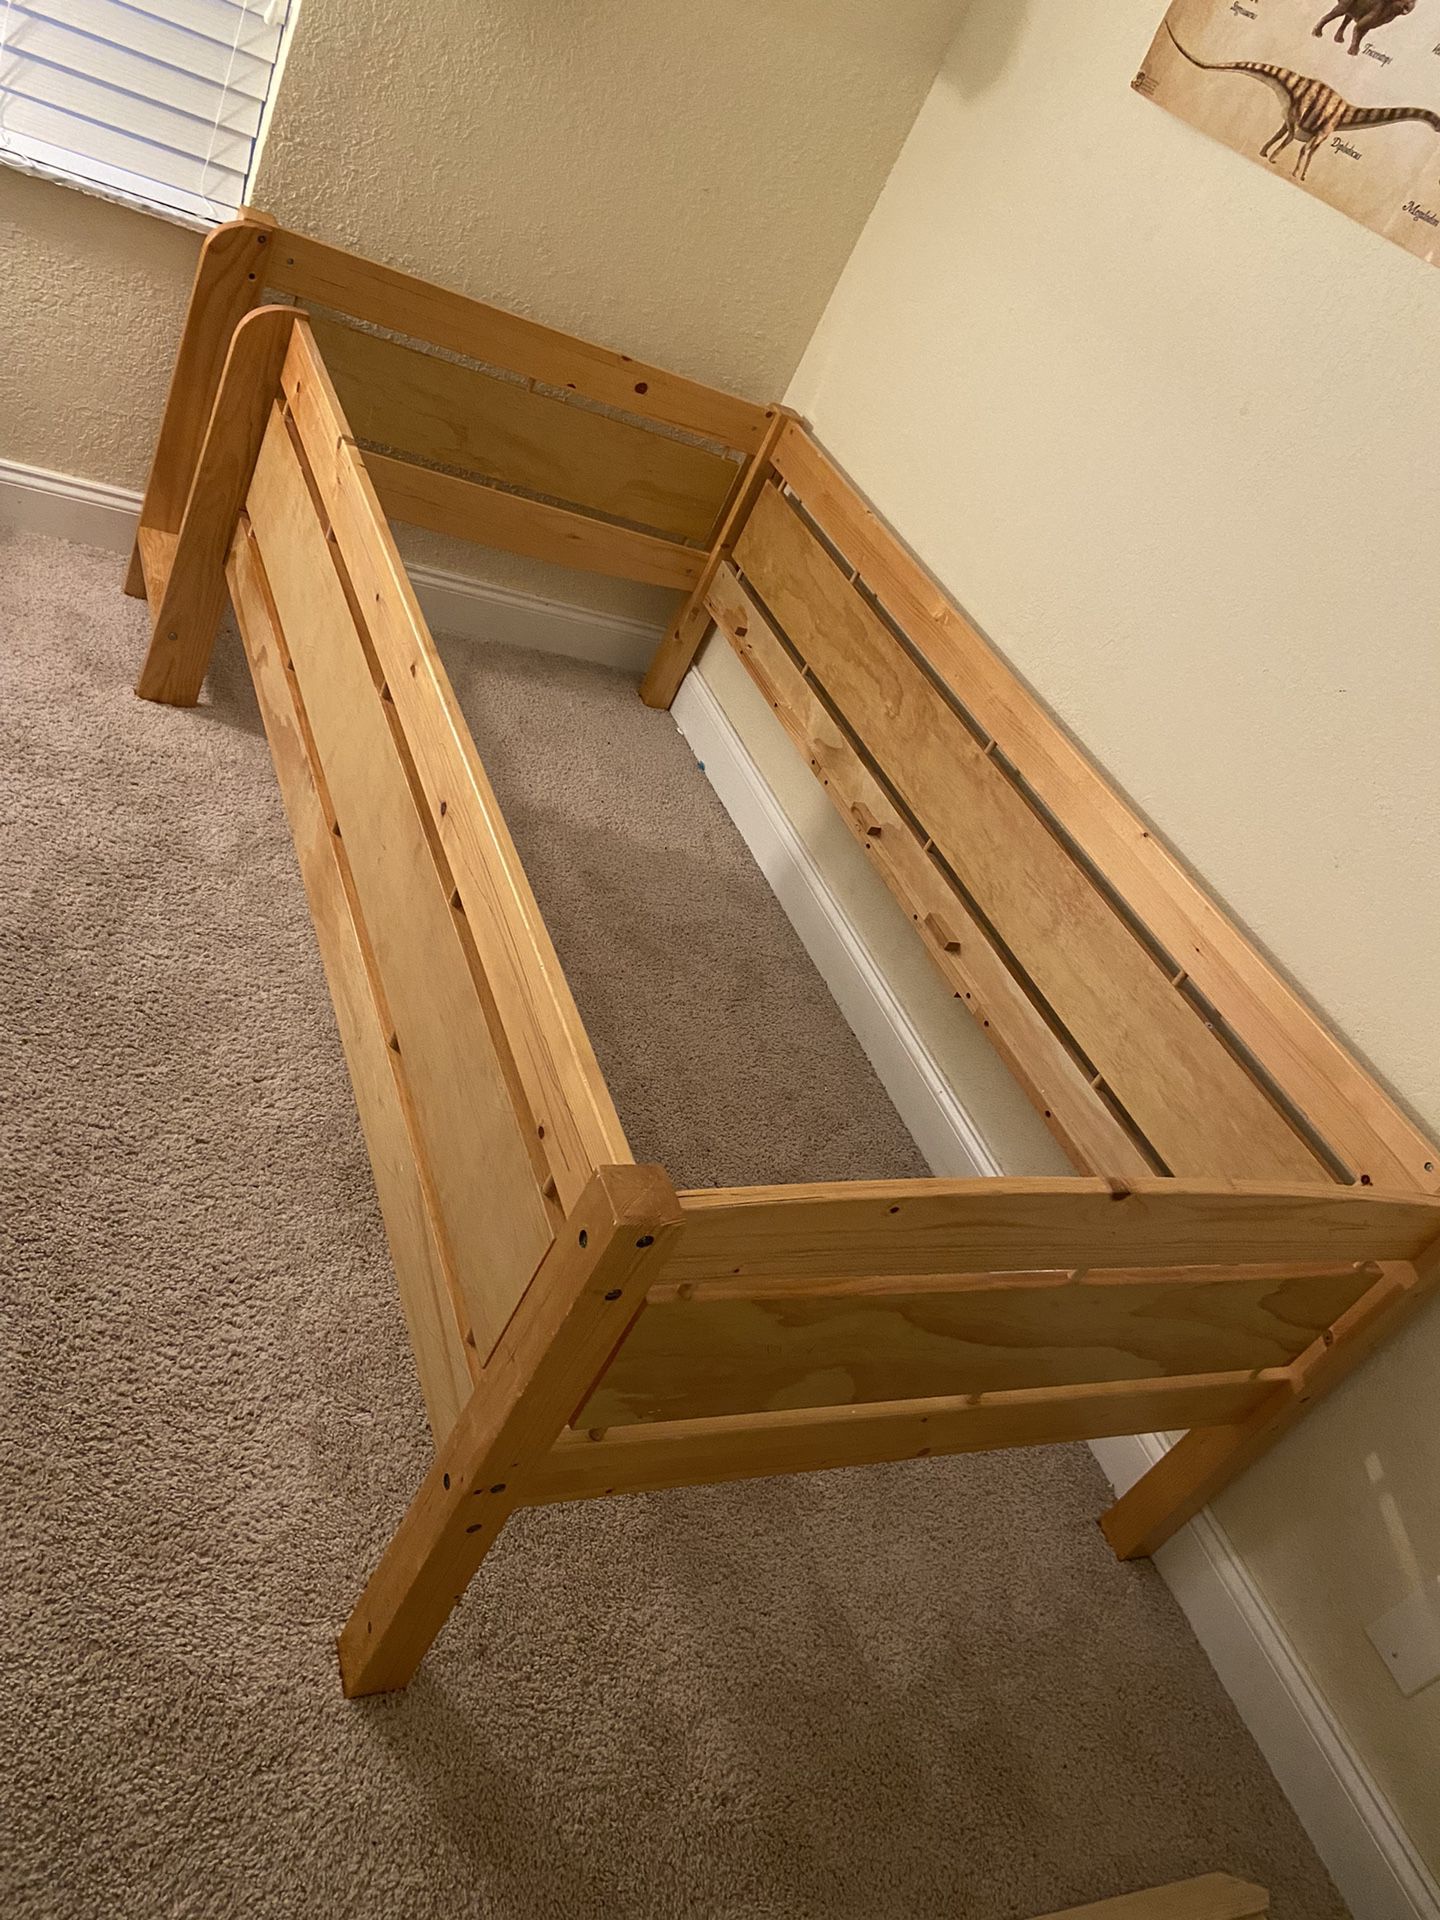 Twin Bed - Headboard and Footboard &Wood- Slats Holders For The mattress. In Boca Raton 